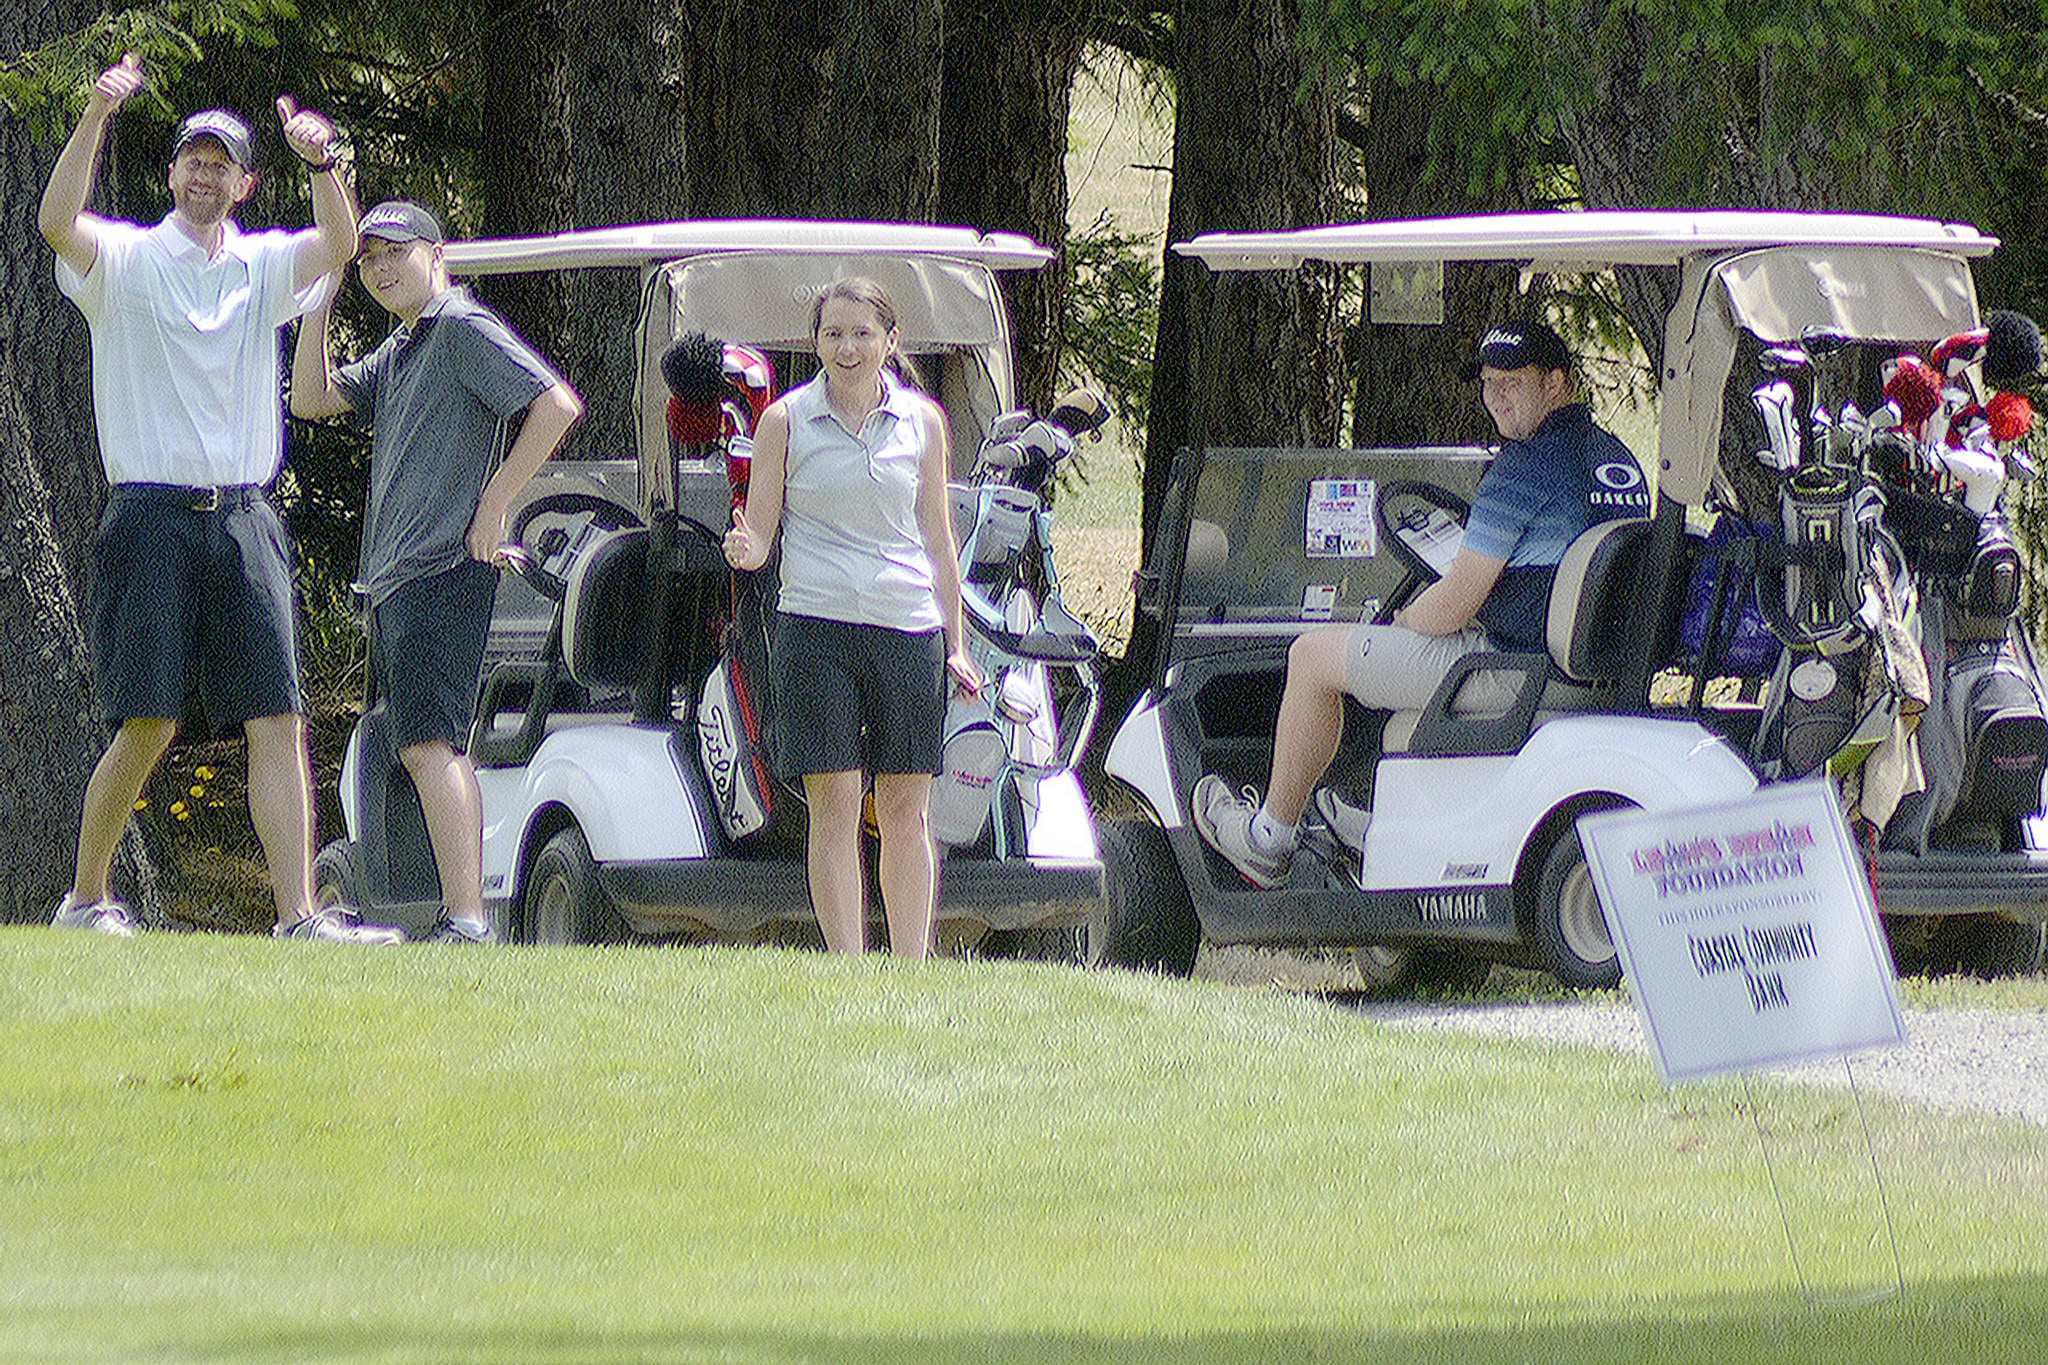 Golf tourney raises $34K for special needs events